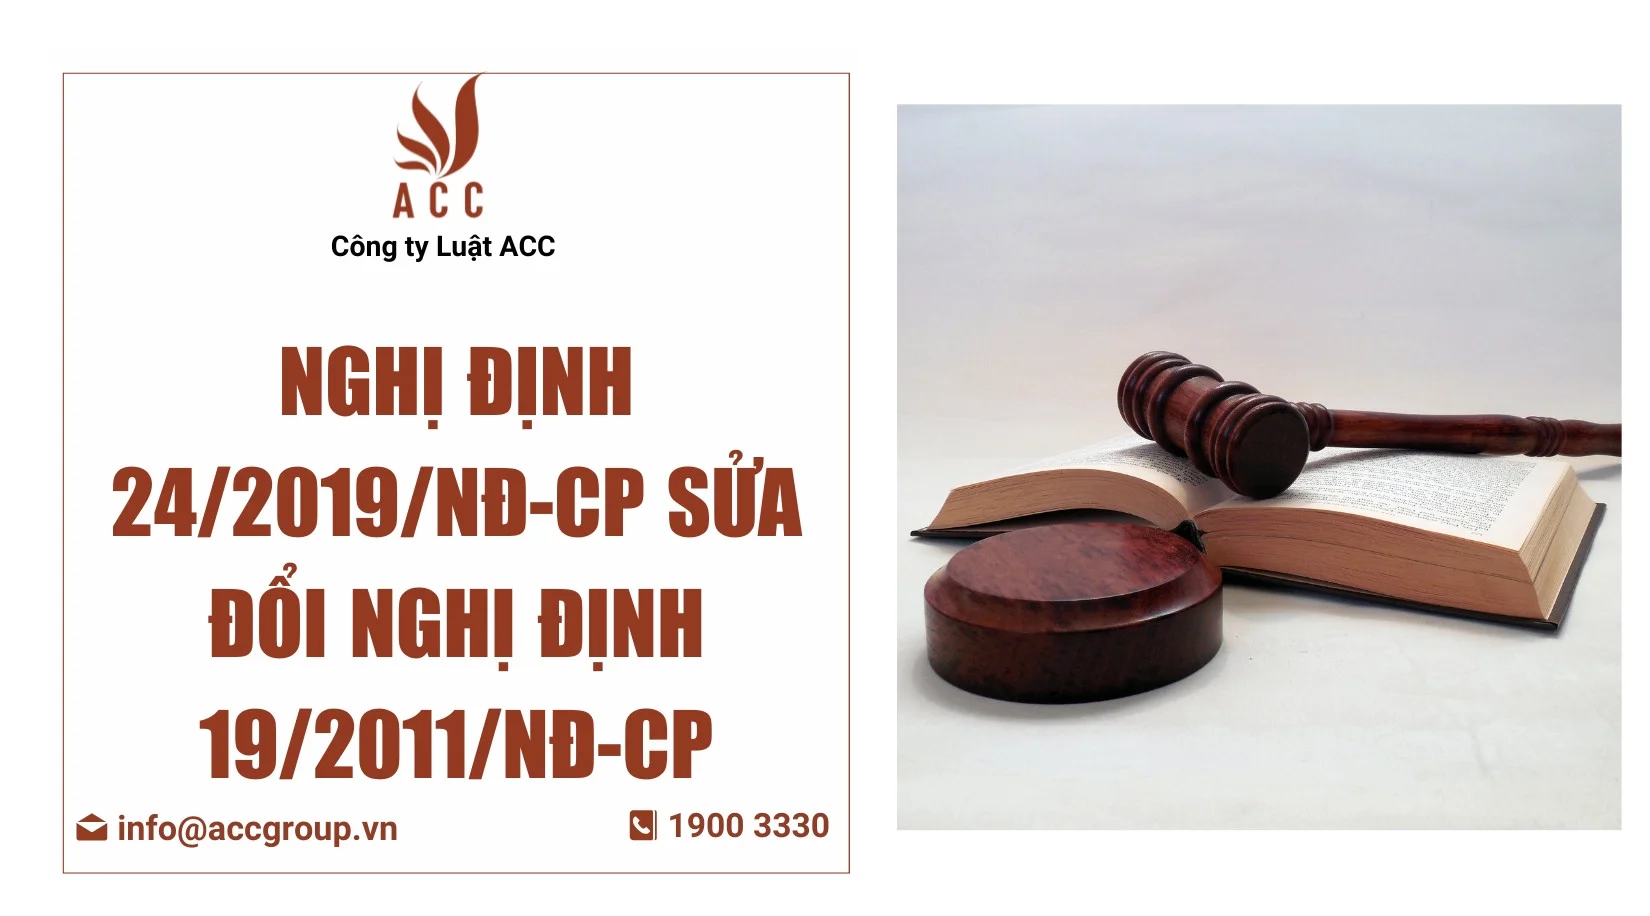 nghi-dinh-242019nd-cp-sua-doi-nghi-dinh-192011nd-cp-1